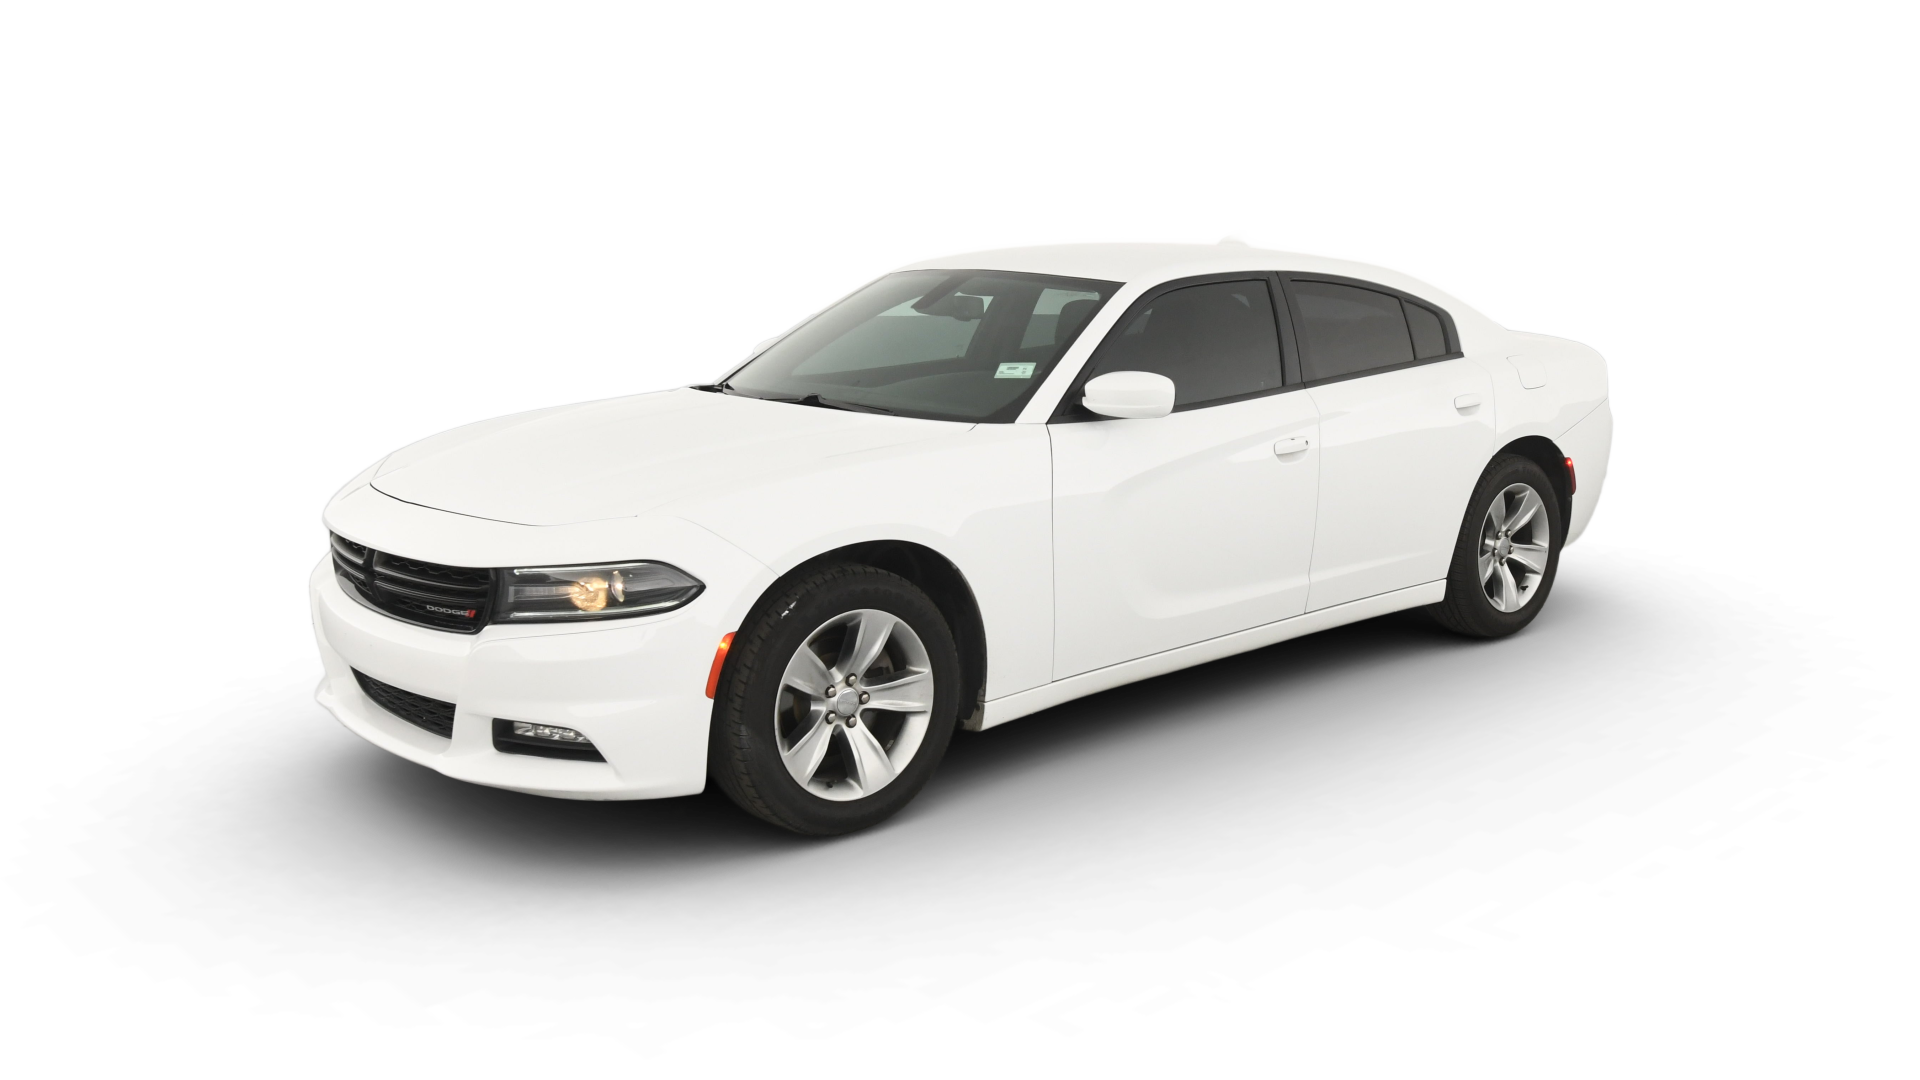 Used 2017 Dodge Charger For Sale Online | Carvana